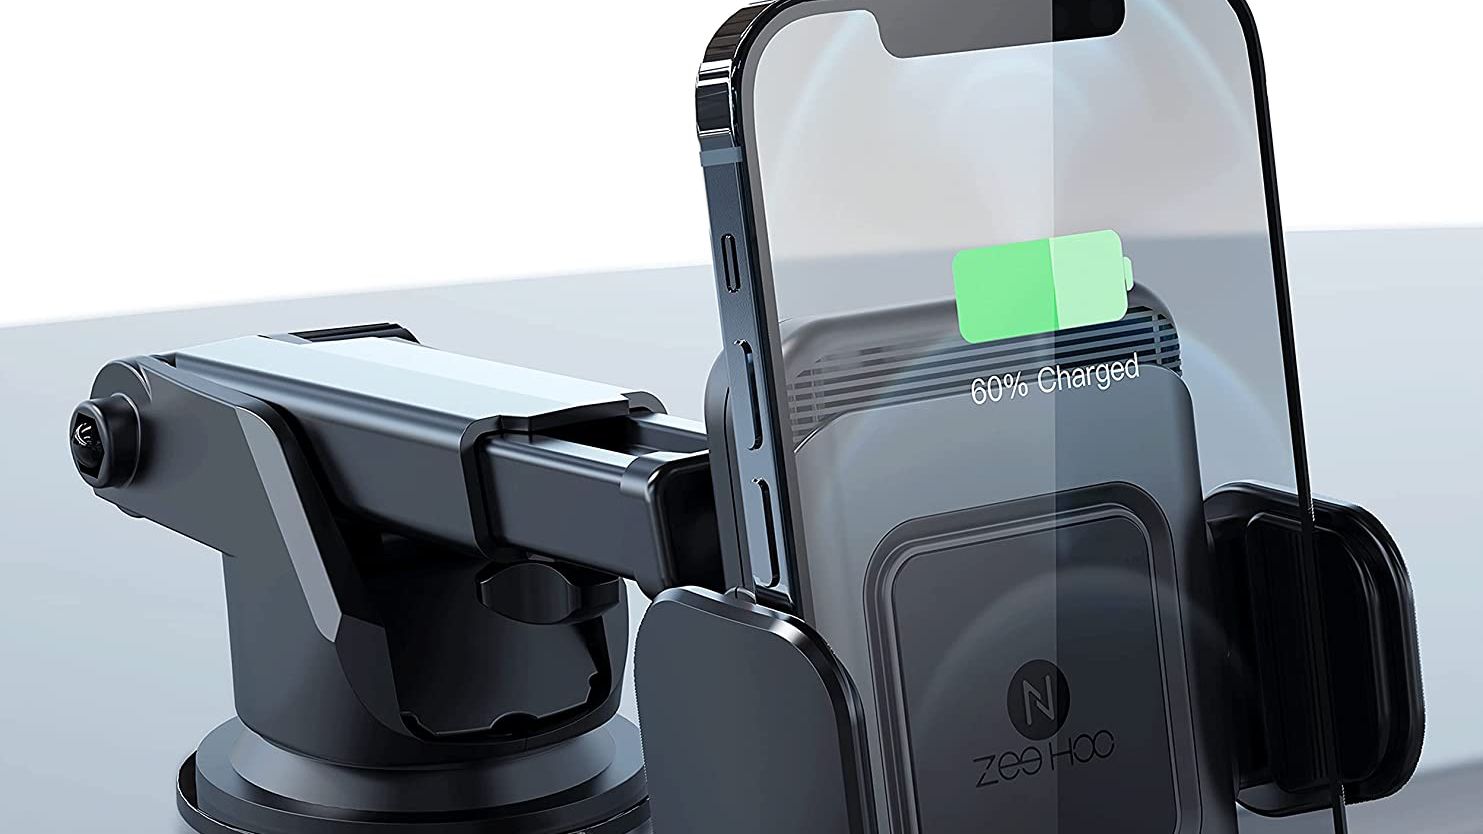 ZeeHoo Wireless Car Charger holding and charging an iPhone